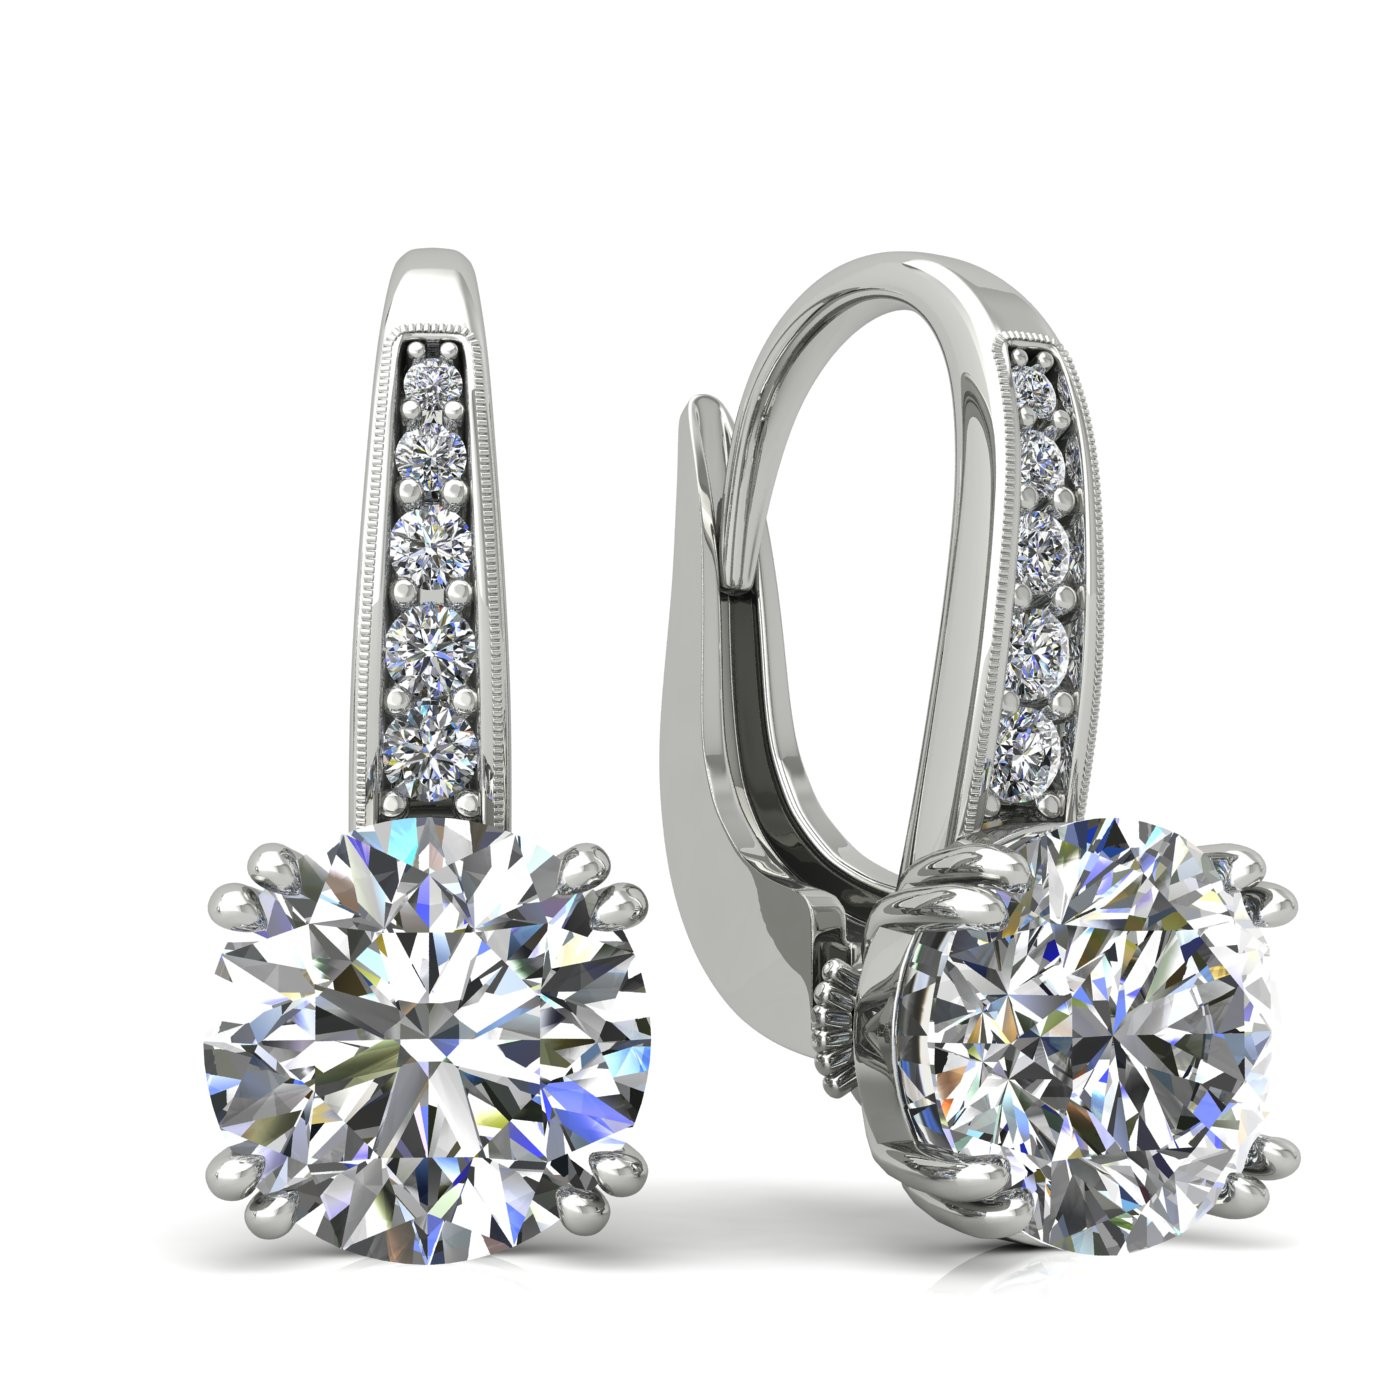 18k white gold  0,3 ct each (0,6 ct tcw) 8 prongs round shape leverback diamond earrings Photos & images